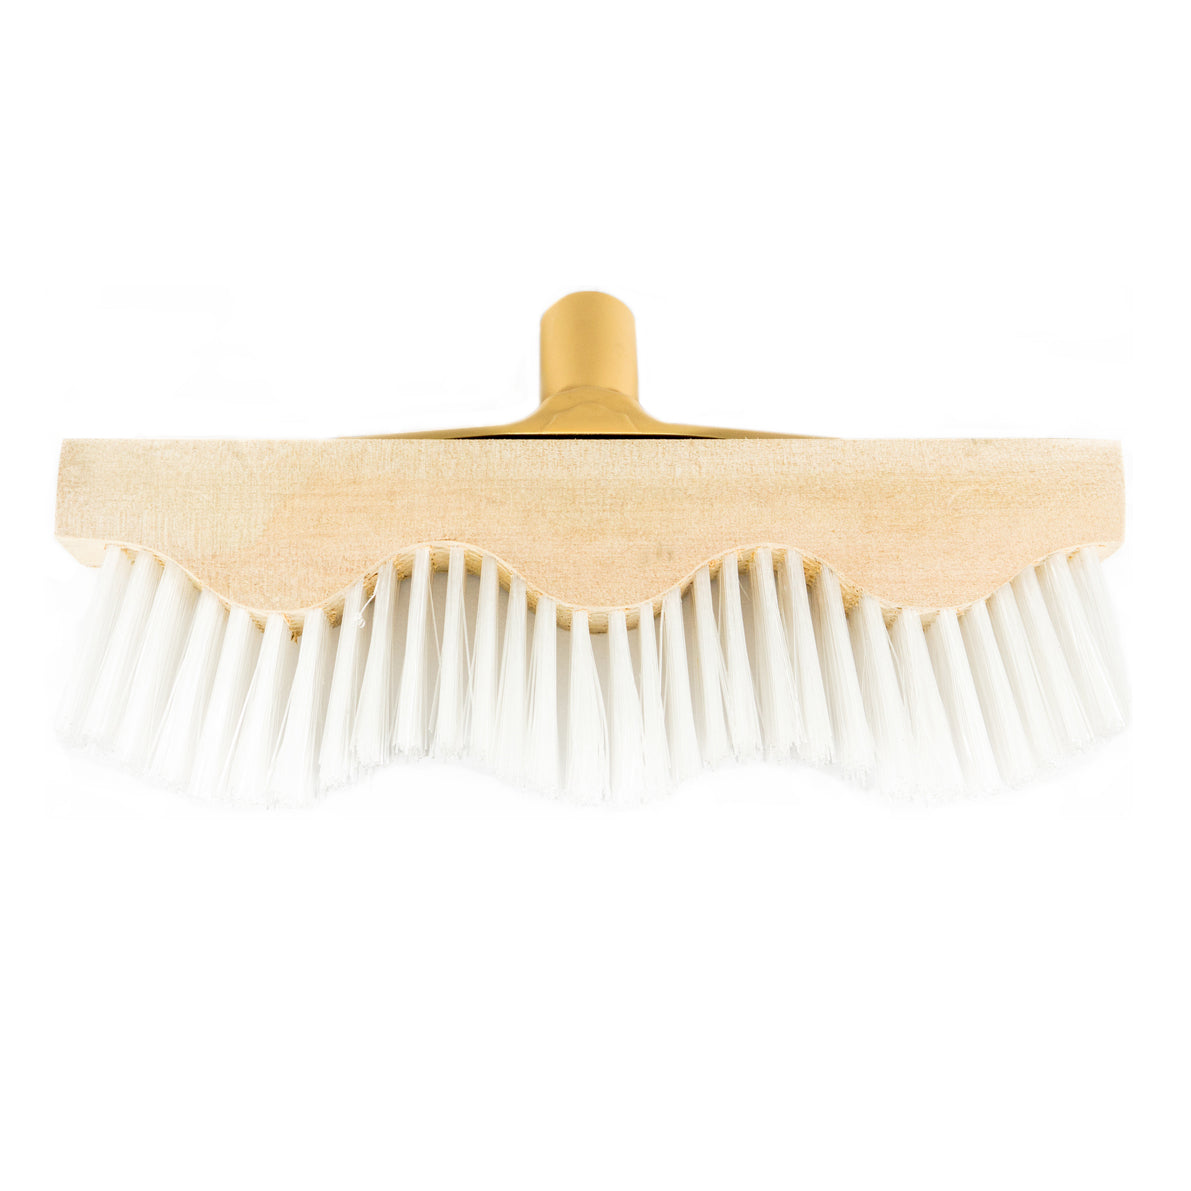 Corrugated PVC Roof Brush with Handle